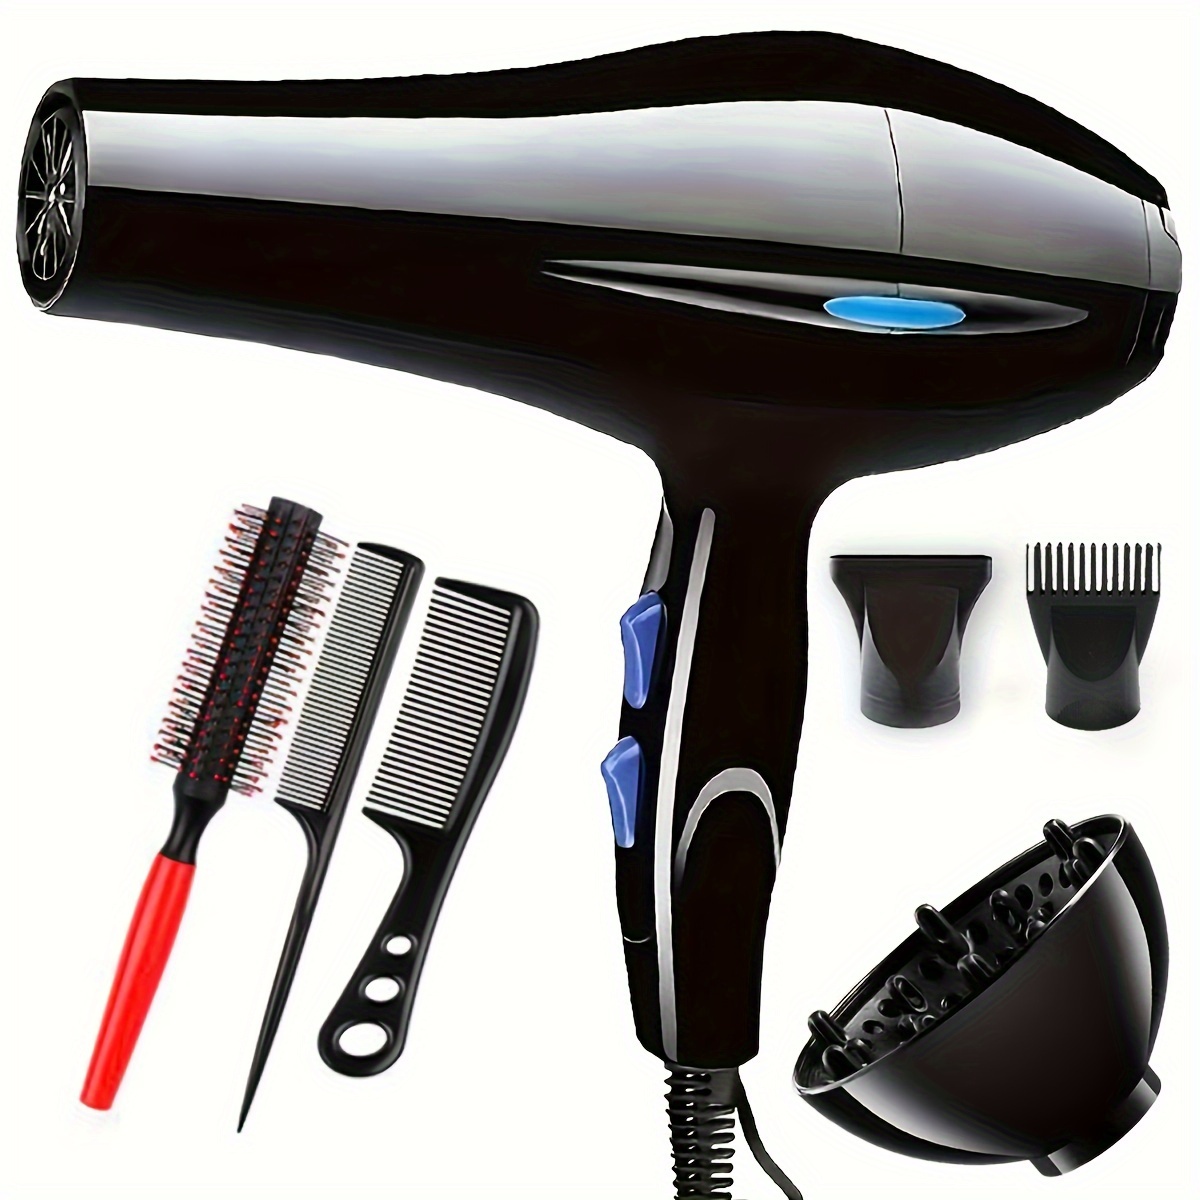 

Professional Hair Dryer, Non-damaging, With Hair Styling Accessories, Gifts For Women, Mother's Day Gift